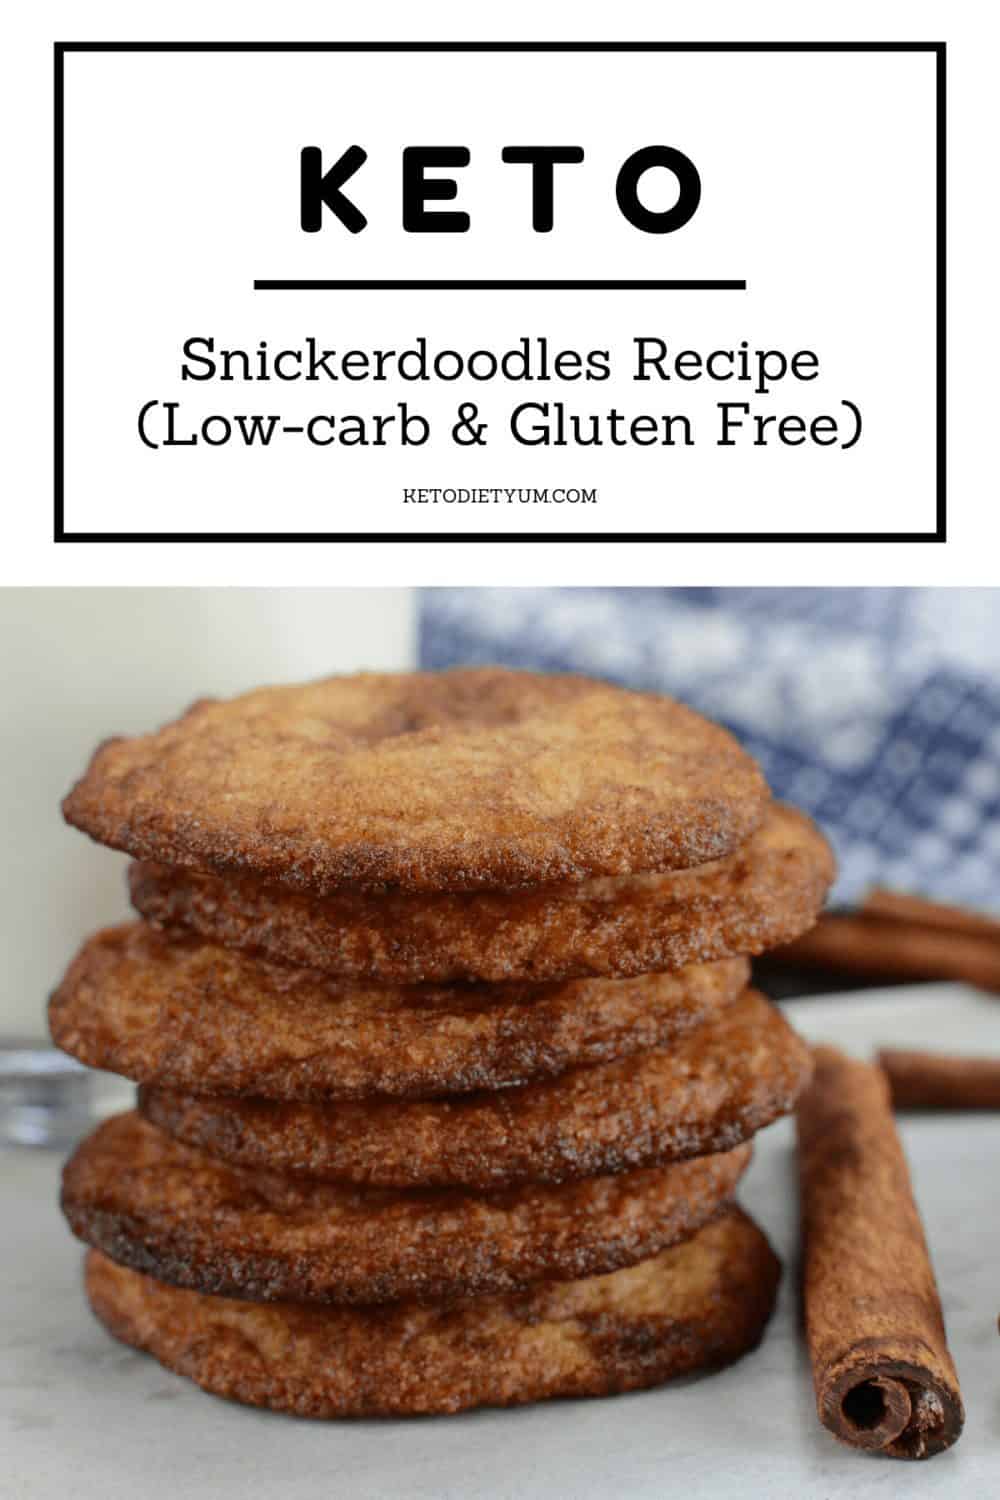 These delicious low-carb Keto Snickerdoodles are crispy on the outside while maintaining that chewy tender inside we all love. Combined with a coat of cinnamon and sweetener they're the perfect cookie to go with your coffee. #lowcarbrecipes #ketosis #ketogenicdiet